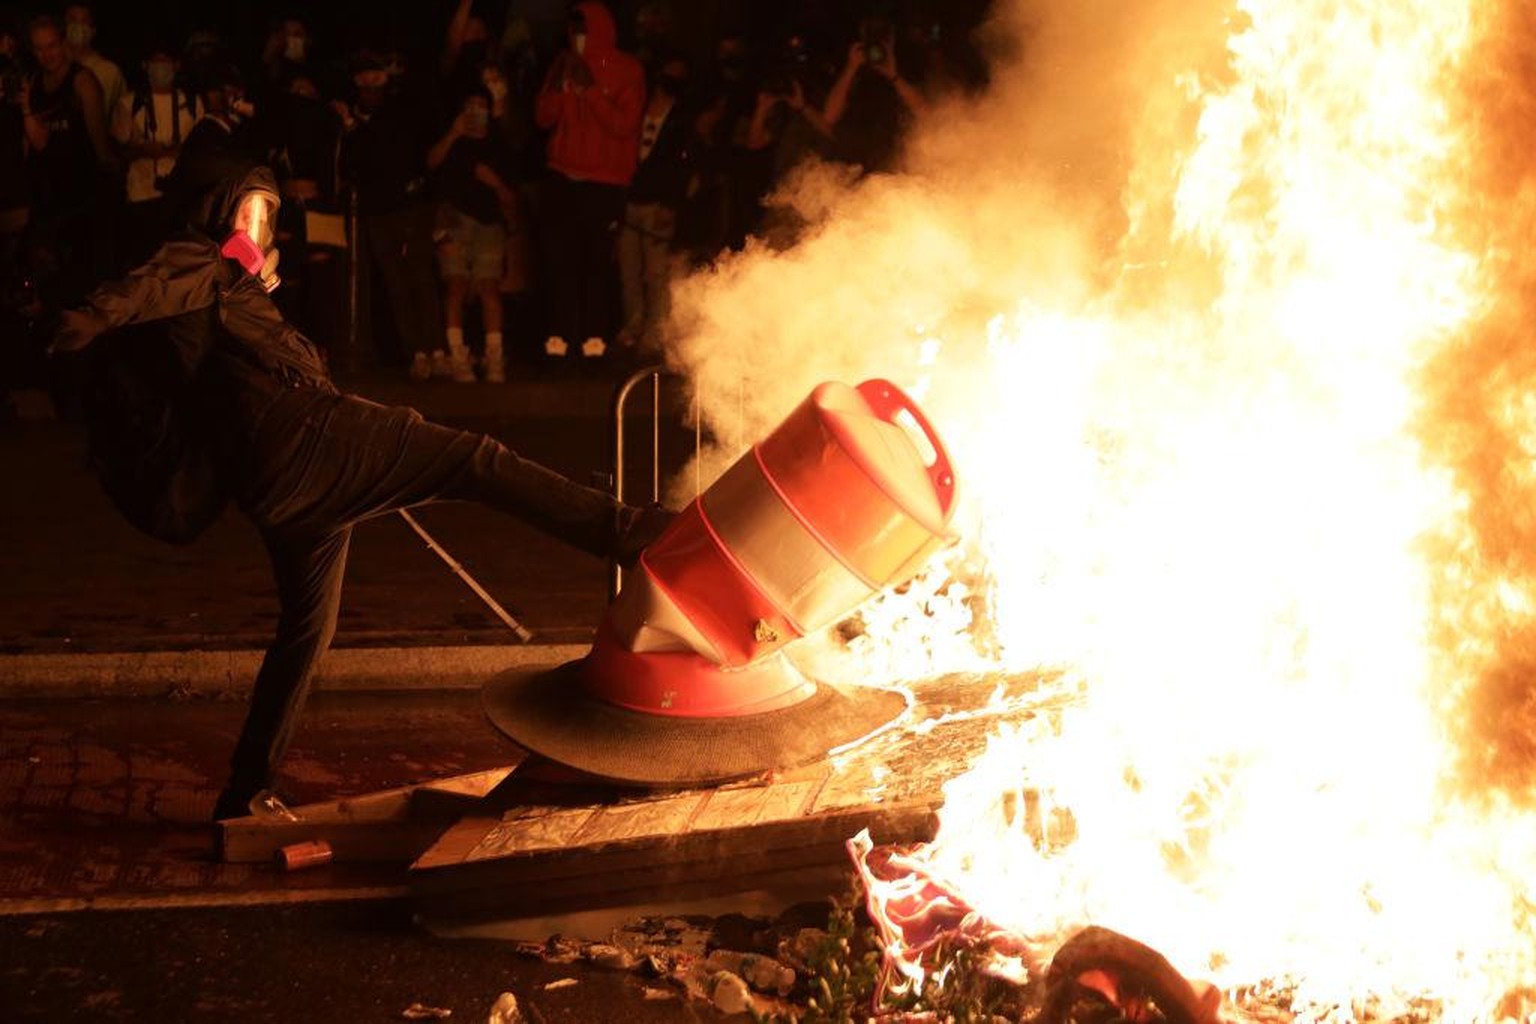 WASHINGTON, DC - MAY 31: Demonstrators set a fire during a protest near the White House on May 31, 2020 in Washington, DC. Minneapolis police officer Derek Chauvin was arrested for Floyd's death and i ...